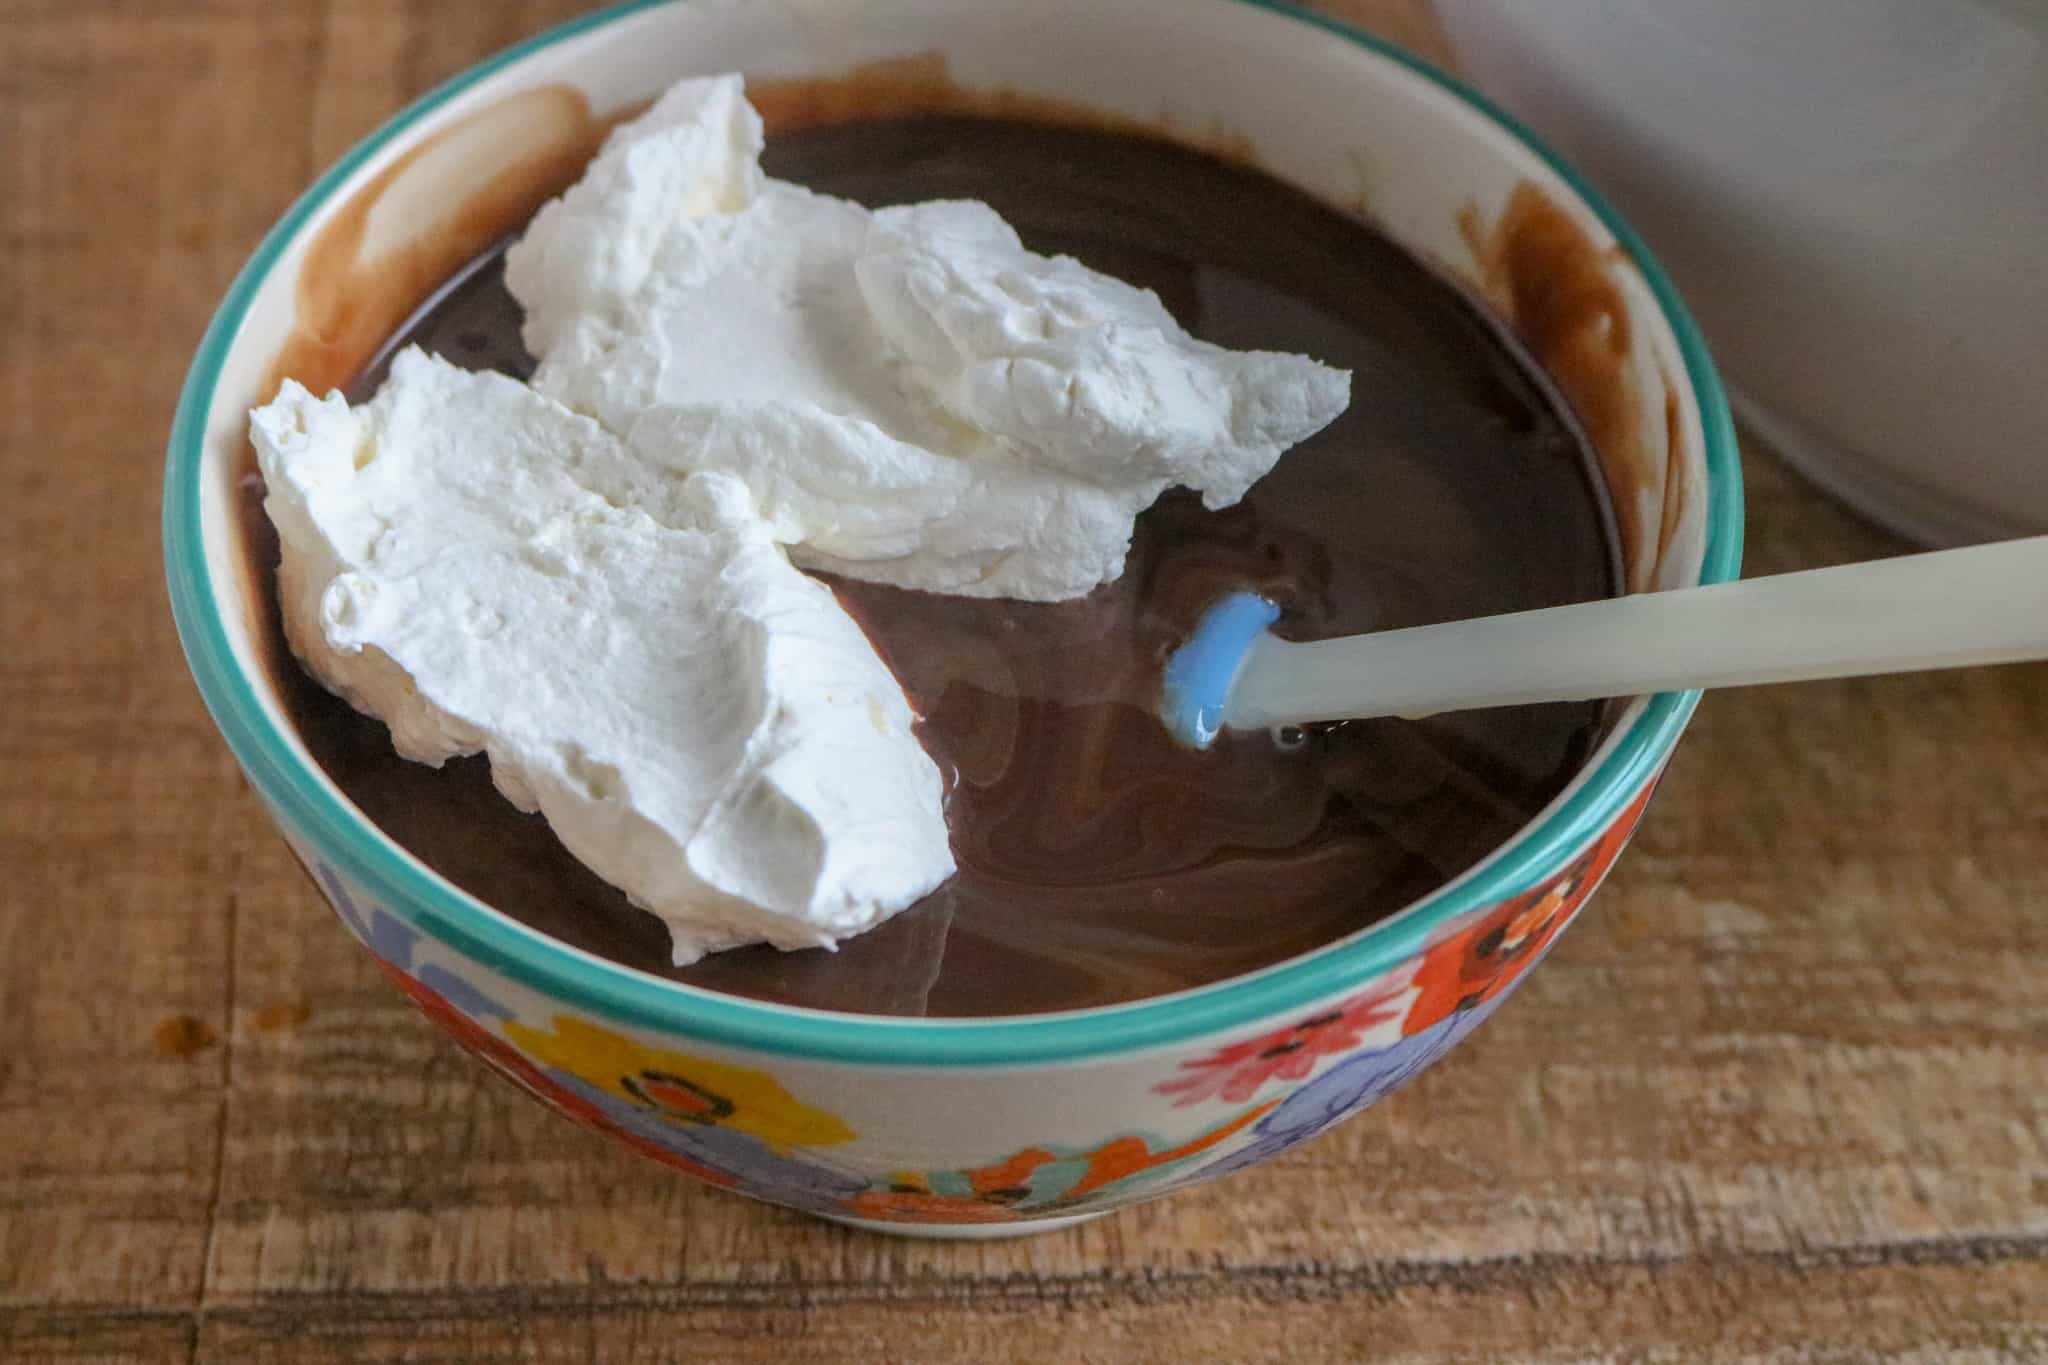 Adding the whipped cream to the sweetened condensed milk and chocolate syrup mixture.